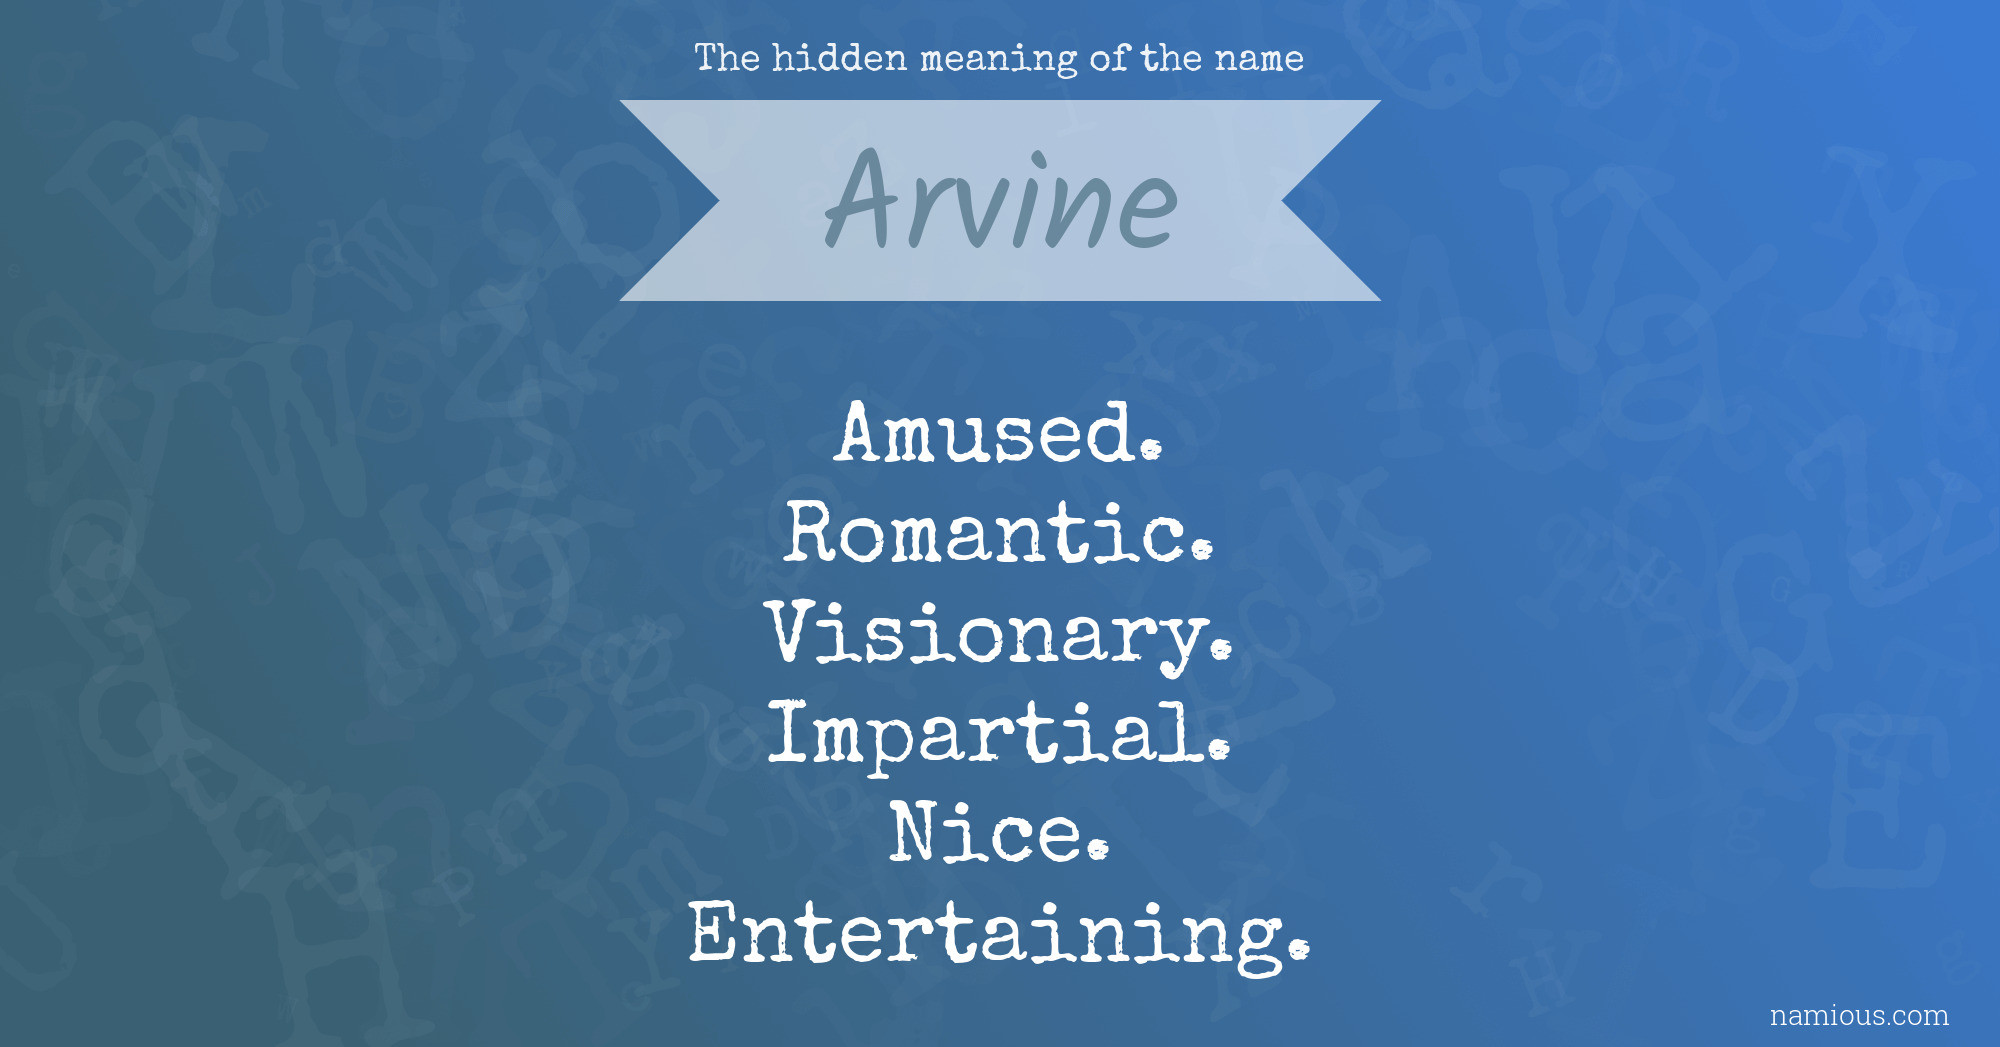 The hidden meaning of the name Arvine